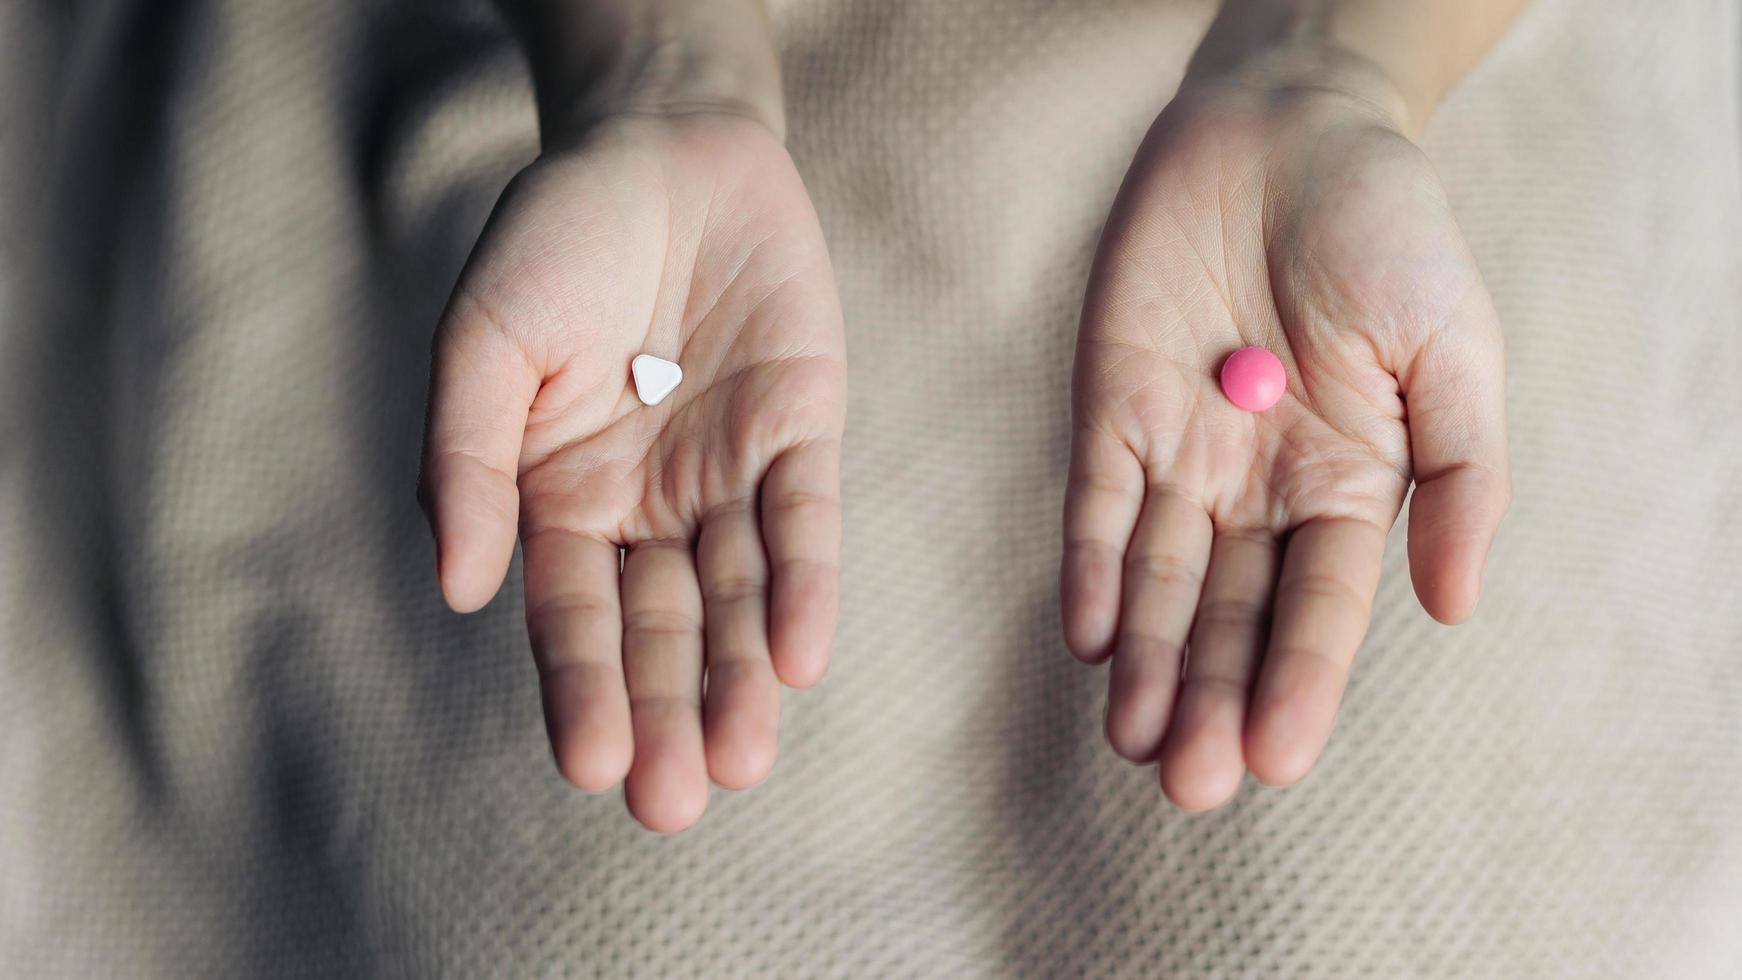 Female hands hold and offer two choice medicine pills capsule for chosen. White and pink candy or meds compare to choose from. Concept decision making or indecisiveness. photo